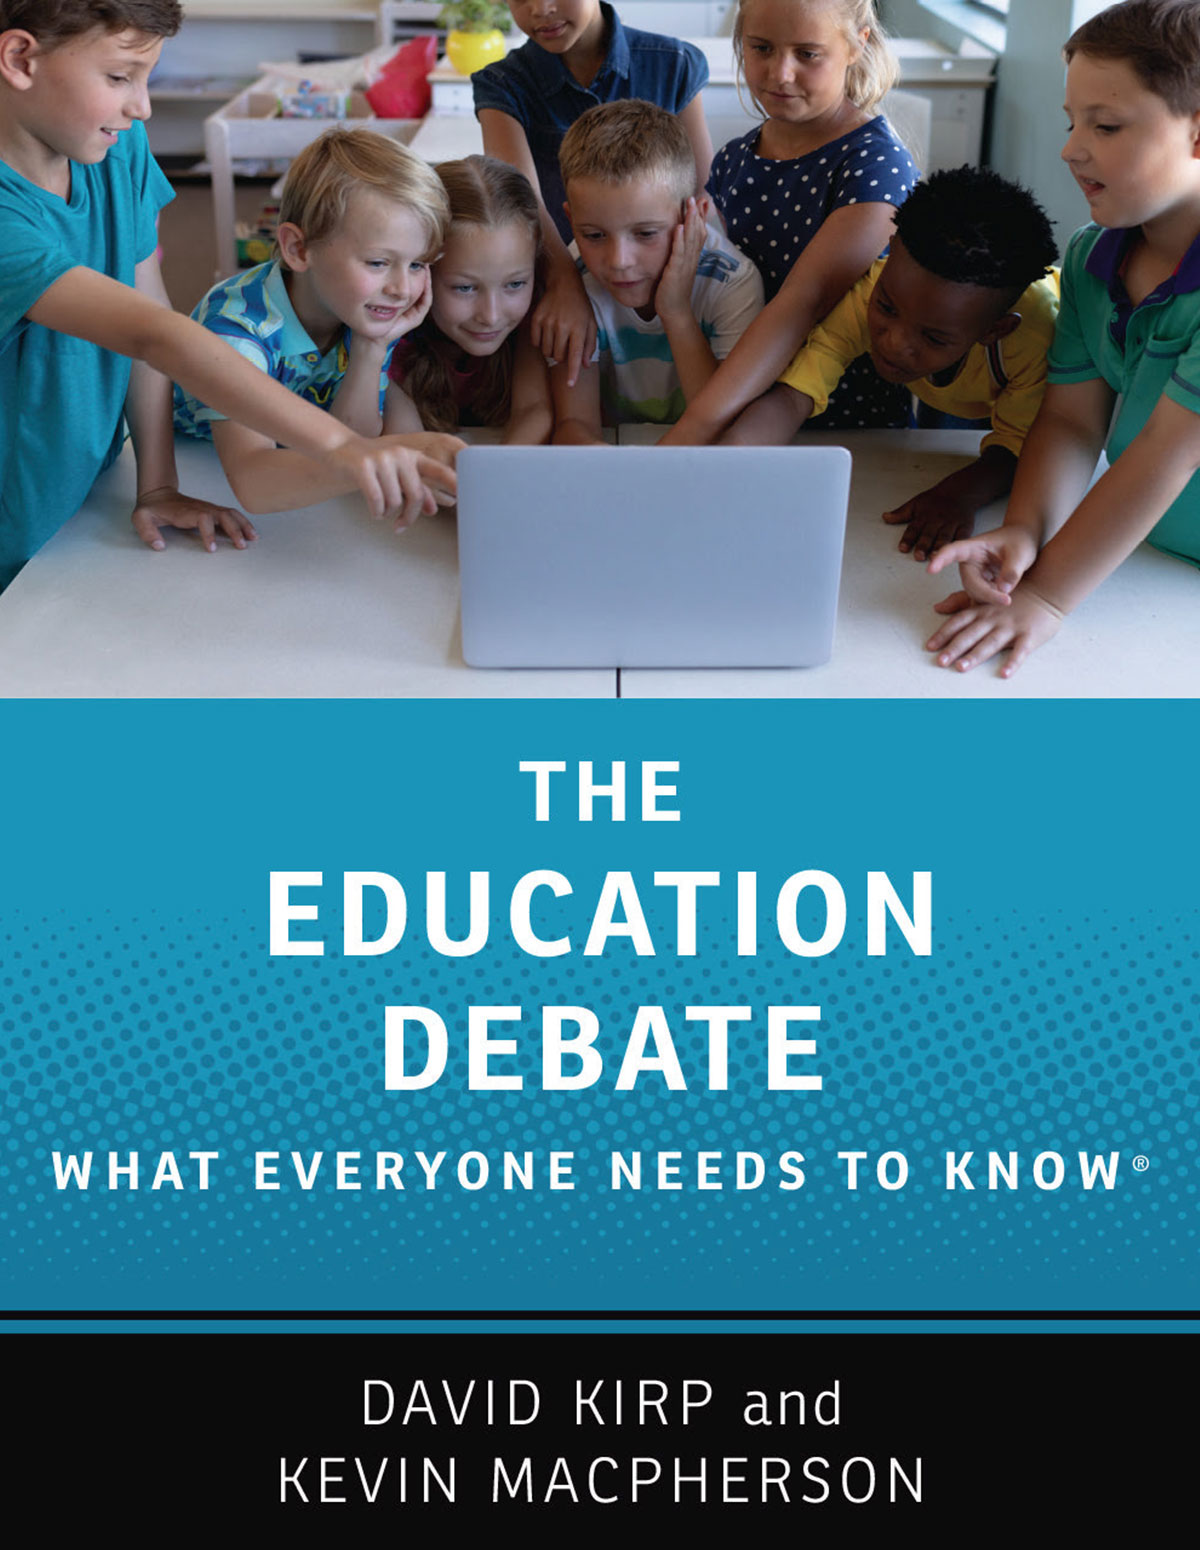 The Education Debate: What Everyone Needs to Know